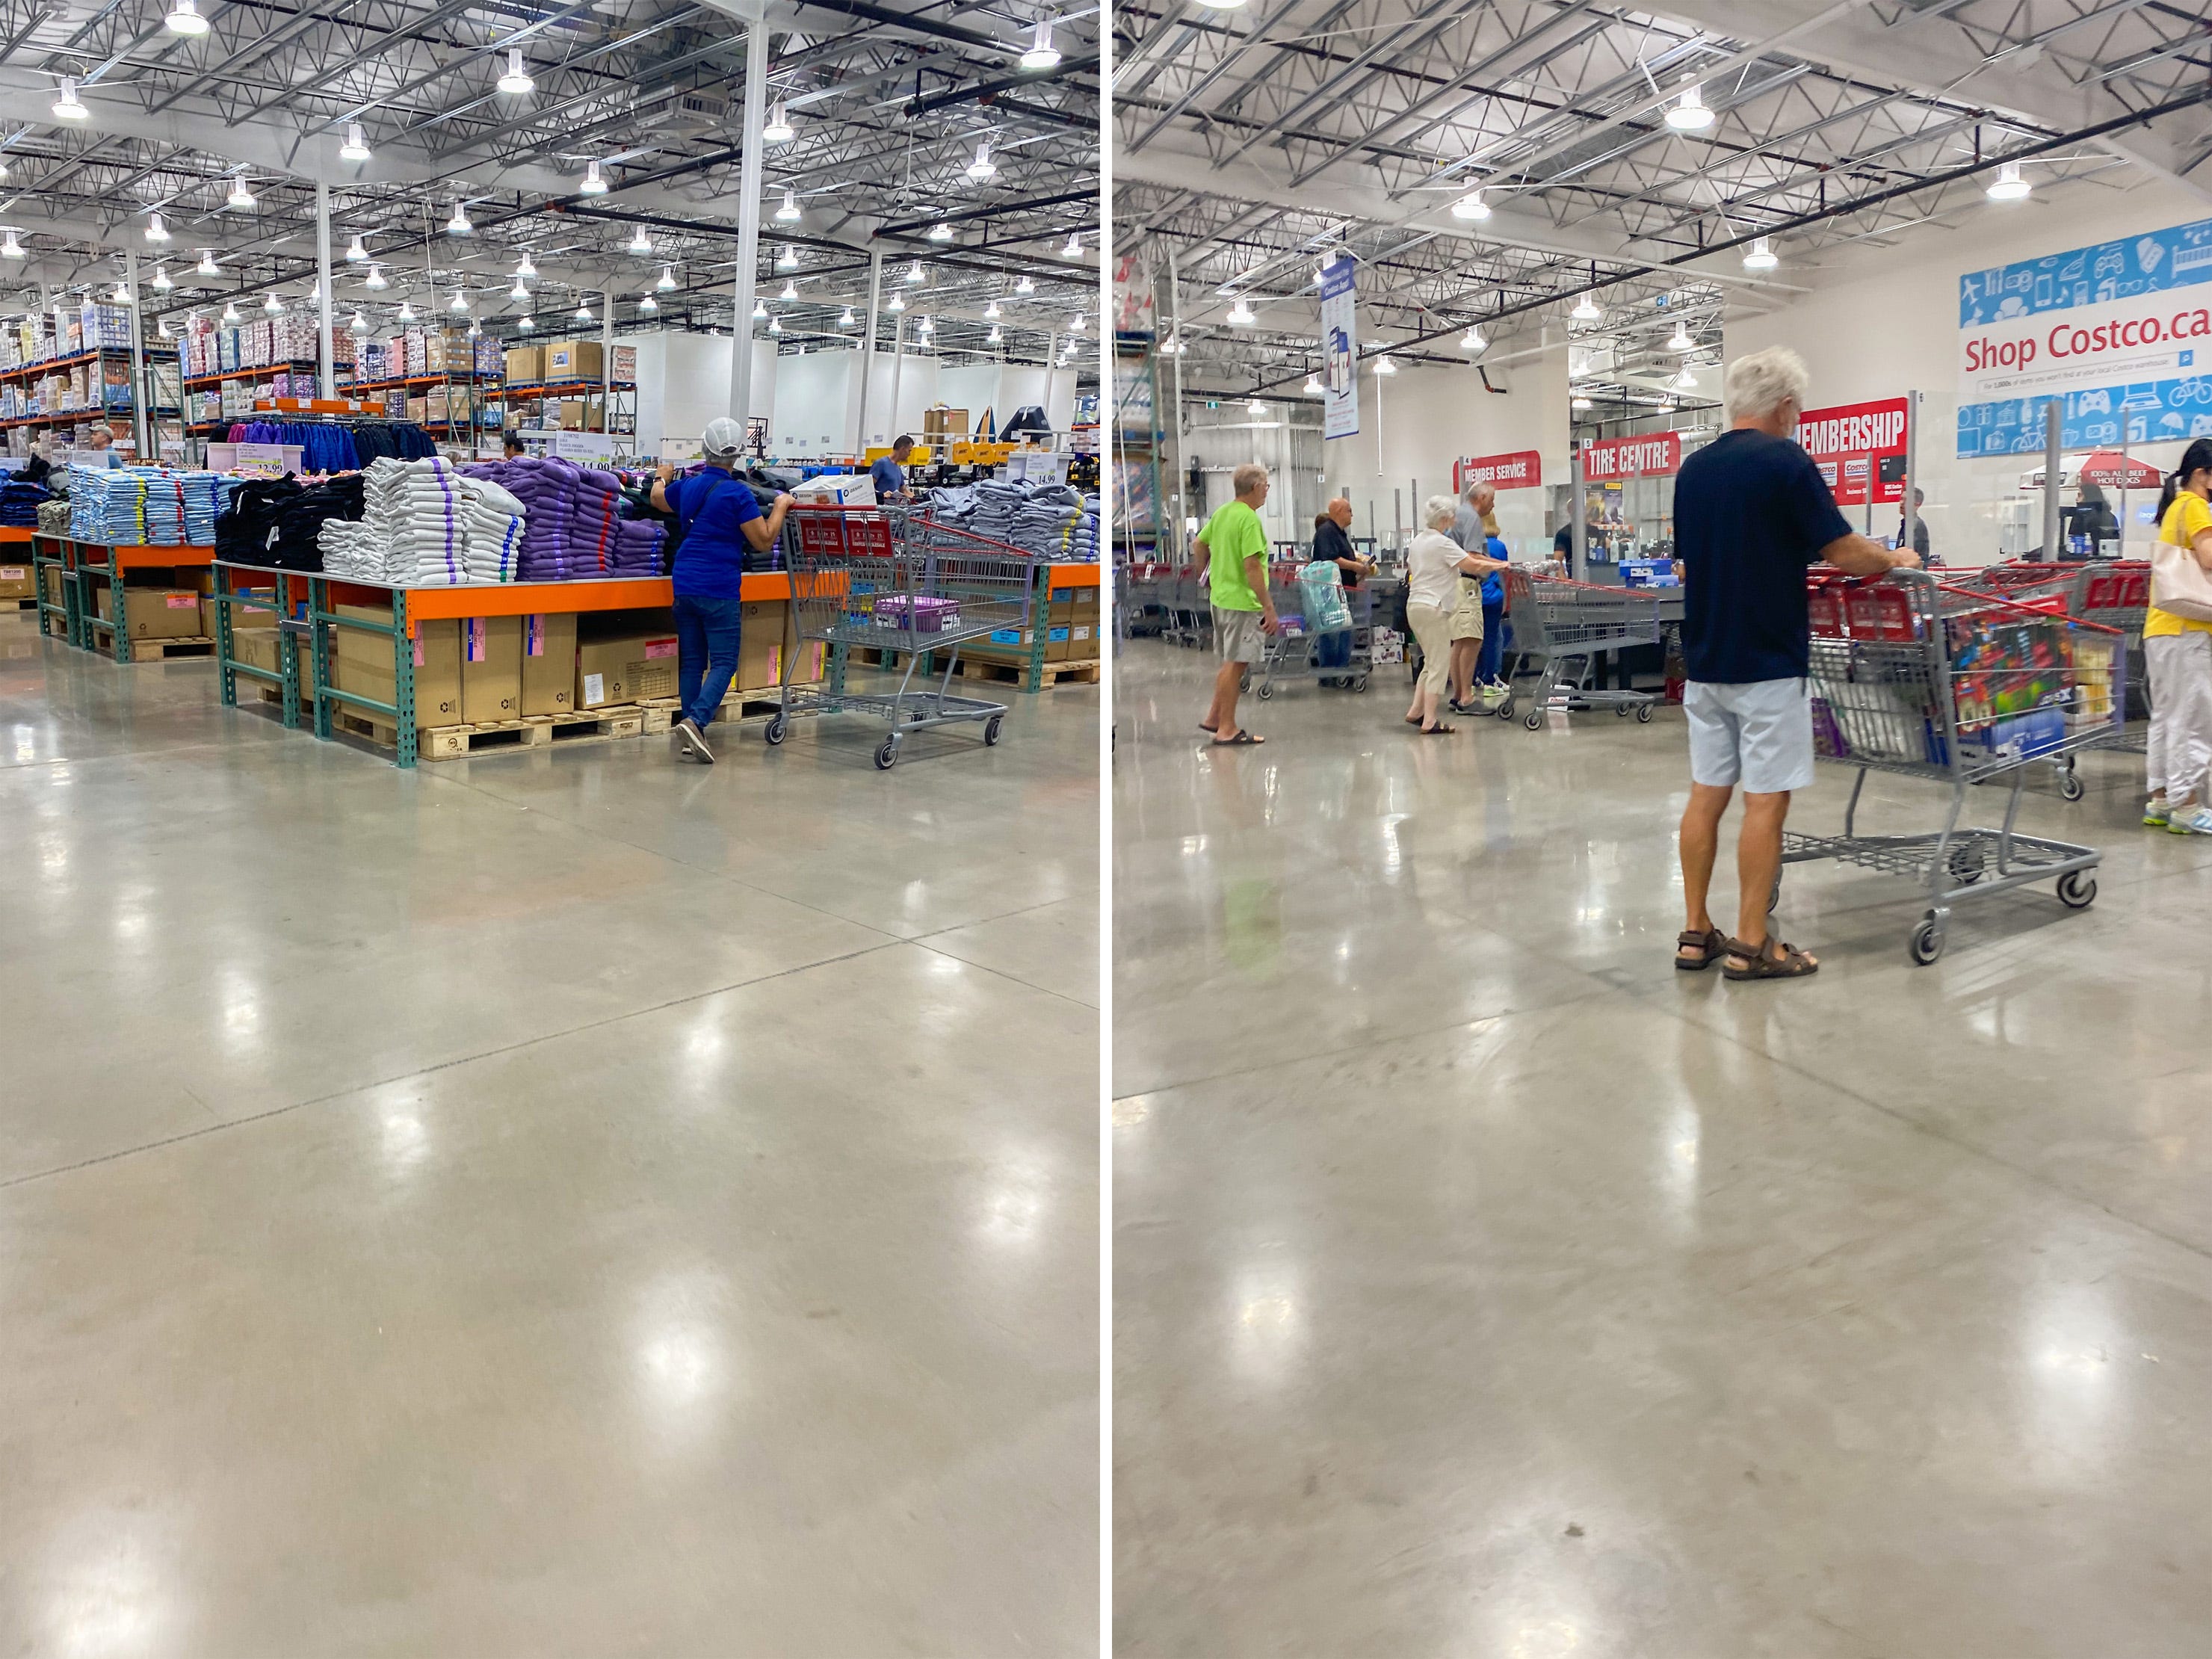 <p>When I walked into Costco, I was immediately transported to my home country because the inside of the warehouse looked exactly like its counterpart stores in the US. </p><p>Ramsey Monroe, a Costco fan who has been to more than 200 locations around the globe, <a href="https://www.insider.com/best-costco-stores-unique-items-2020-2" rel="nofollow noopener sponsored">previously told Insider</a> that the layout is similar in every store she's been in. </p><p>"If I ever feel homesick, I can just go to Costco," Monroe said. "I just feel at home at Costco so no matter where I am in the world, it's just comforting."</p>